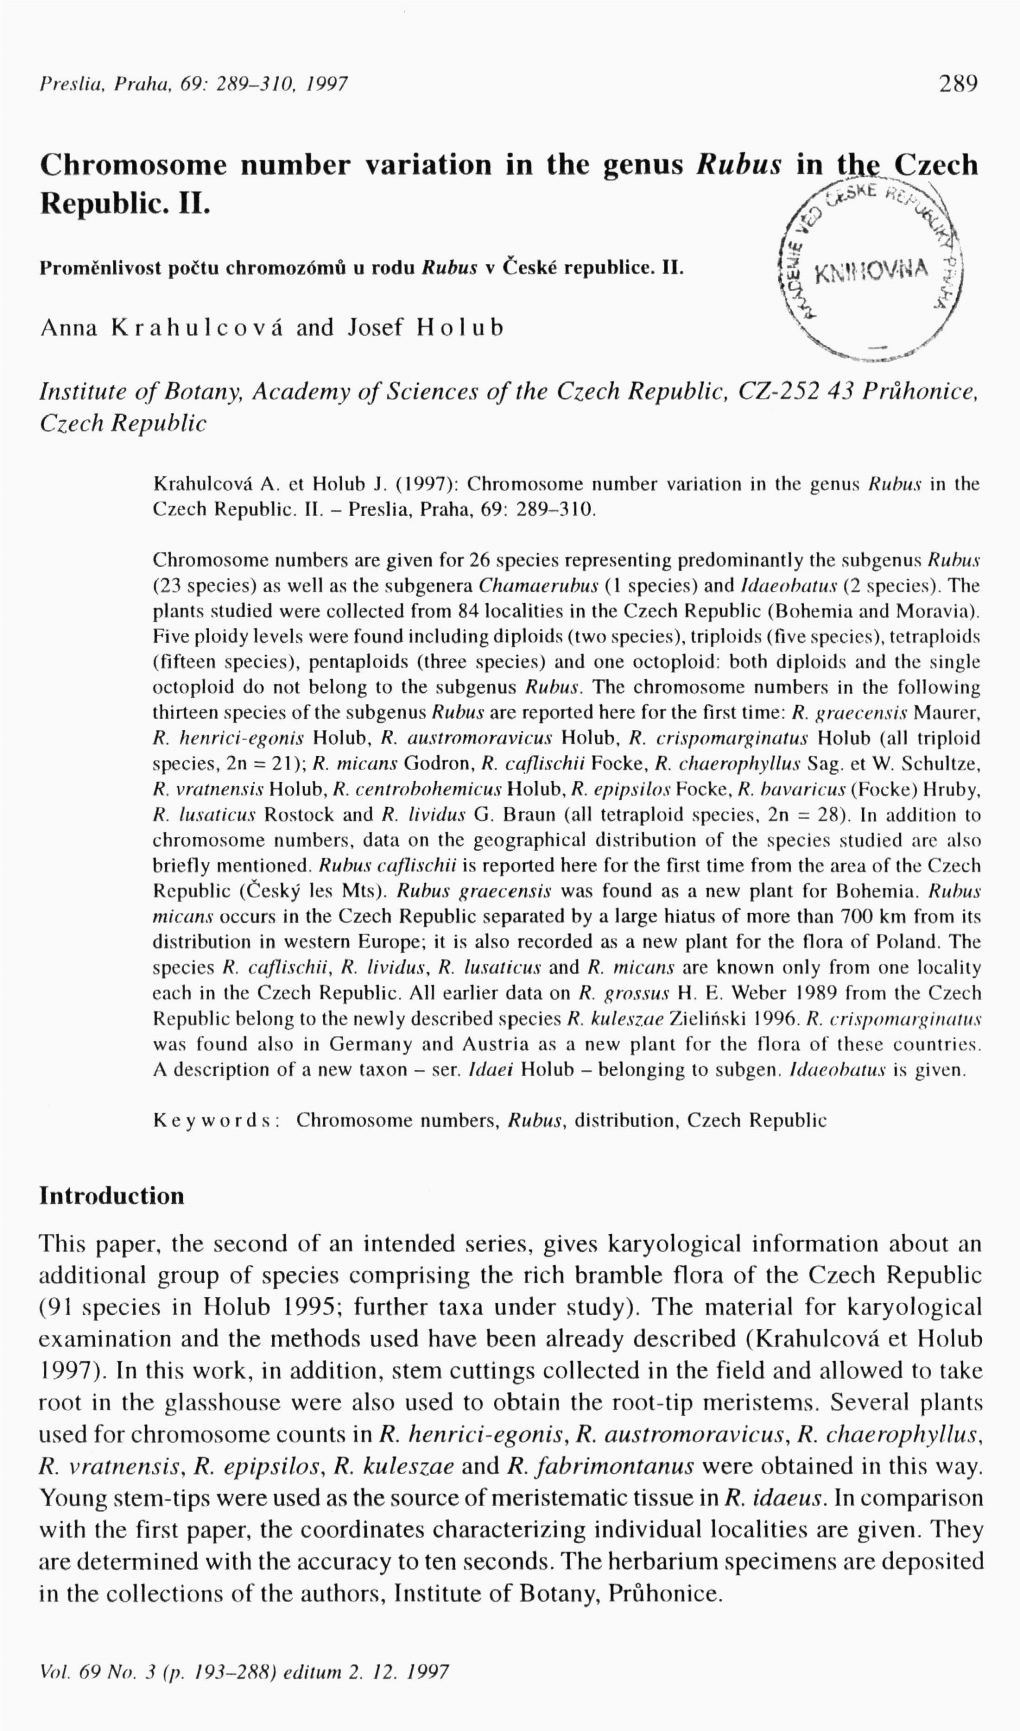 Chromosome Number Variation in the Genus Rubus in the Czech